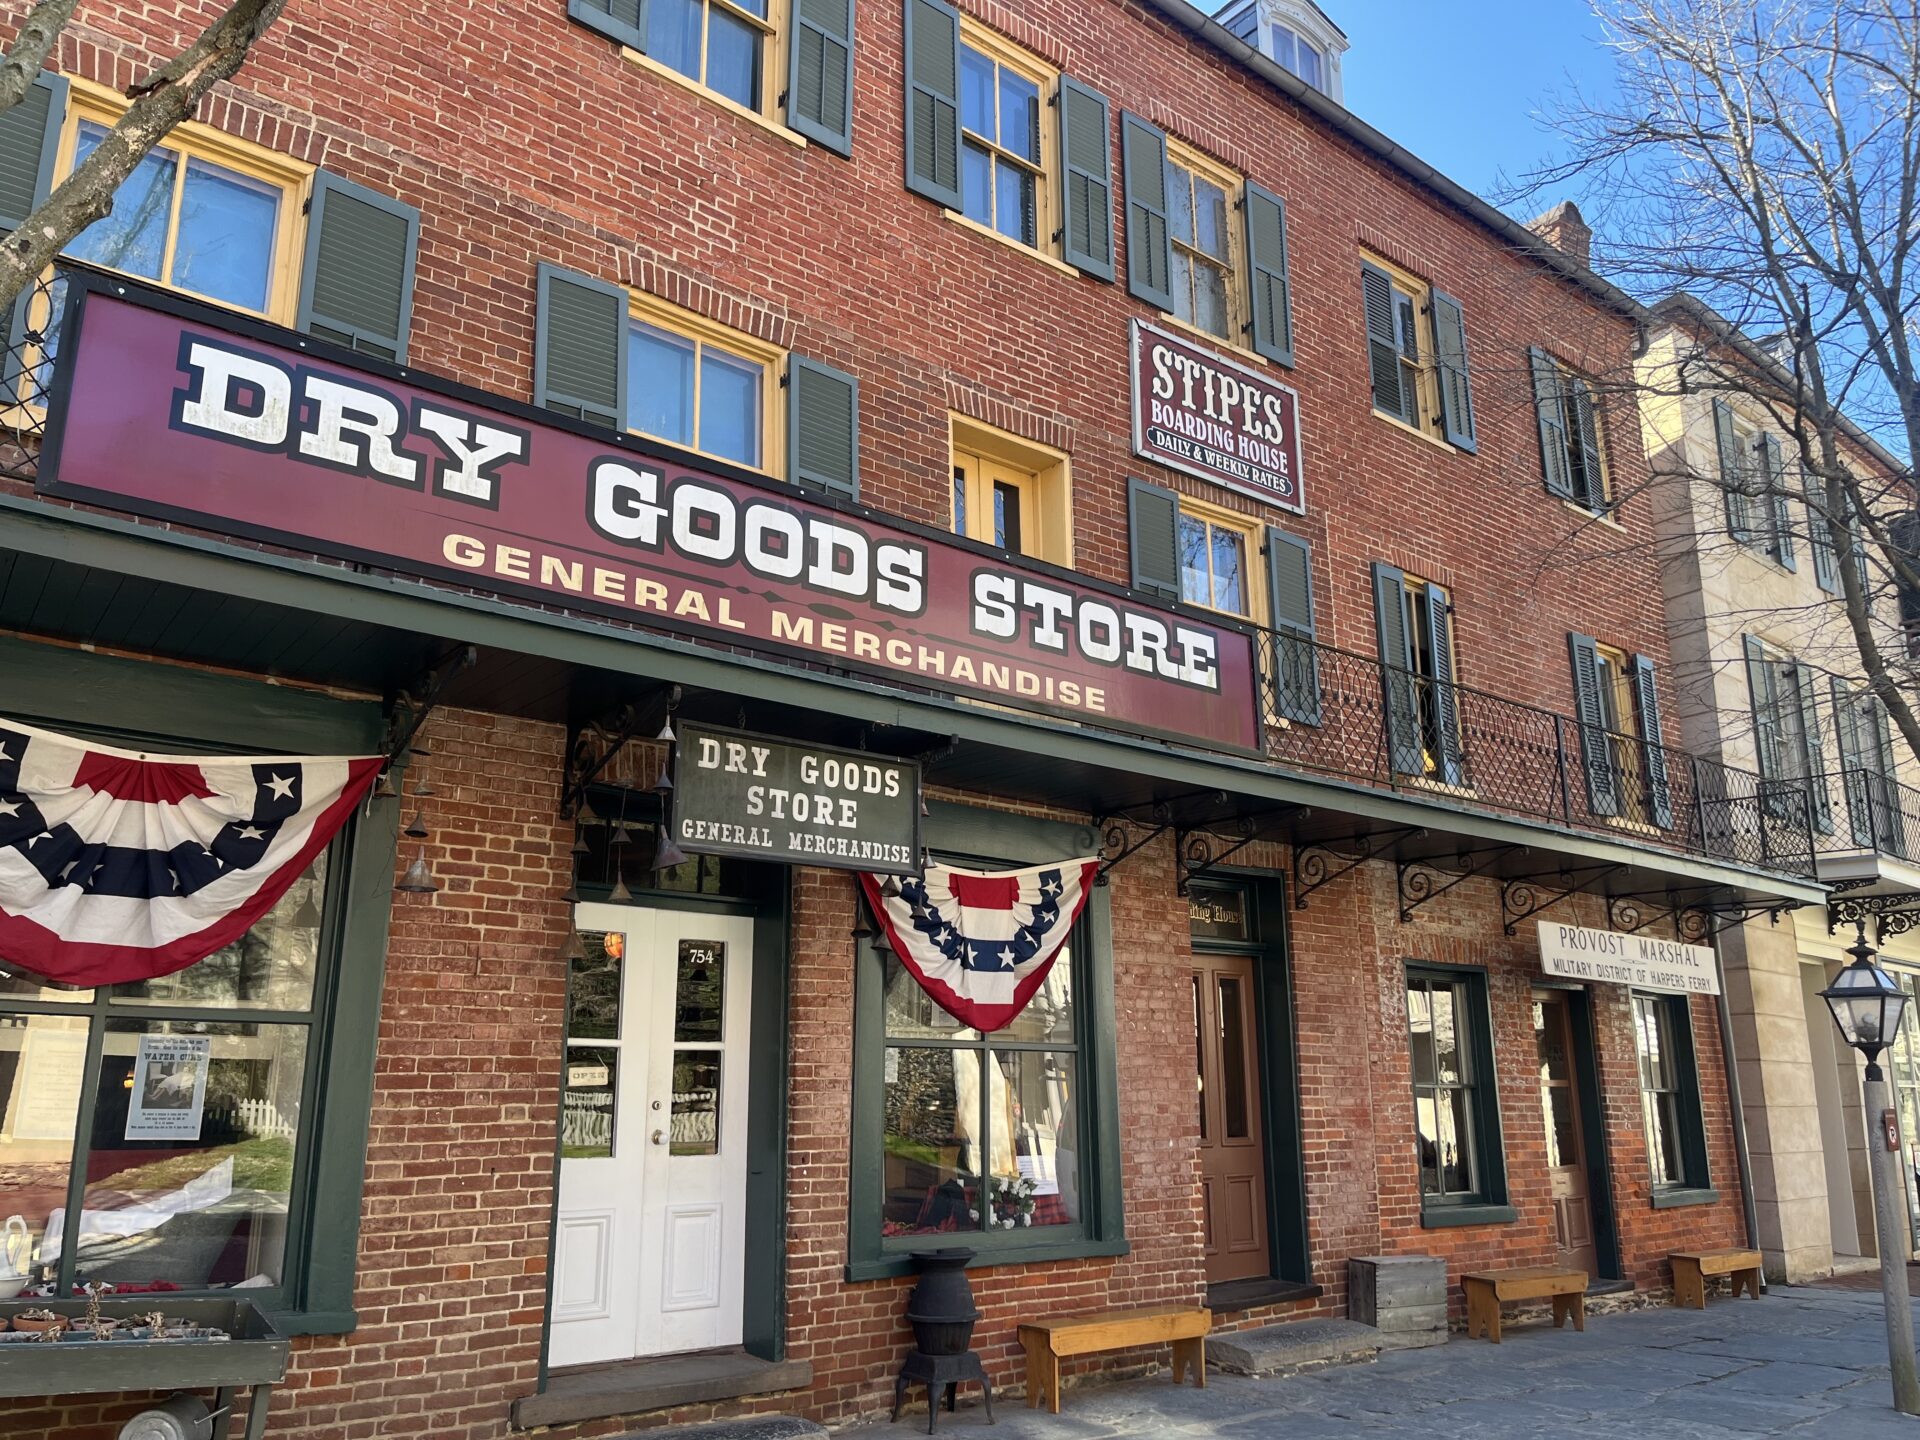 Olden brick buildings display fake, old-time signs that read "Dry Goods Store" and "Stipes Boarding House." The buildings line a street in downtown Harpers Ferry, with a stone sidewalk before them.